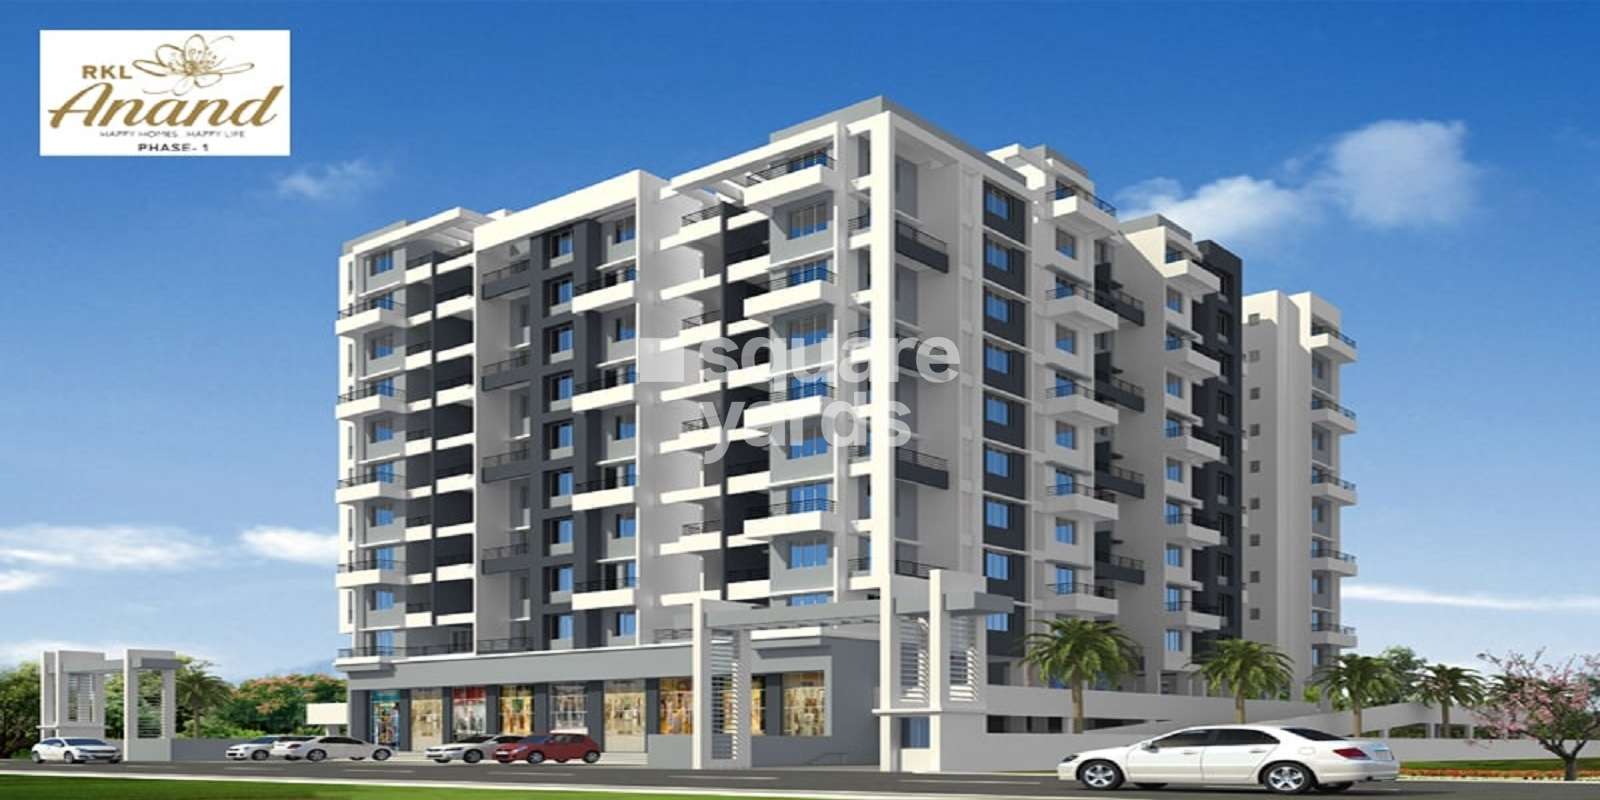 Rk Lunkad Nisarg Anand Price On Request 1 Bhk 2 Bhk Bhk Floor Plans Available In Pimple Nilakh Pune